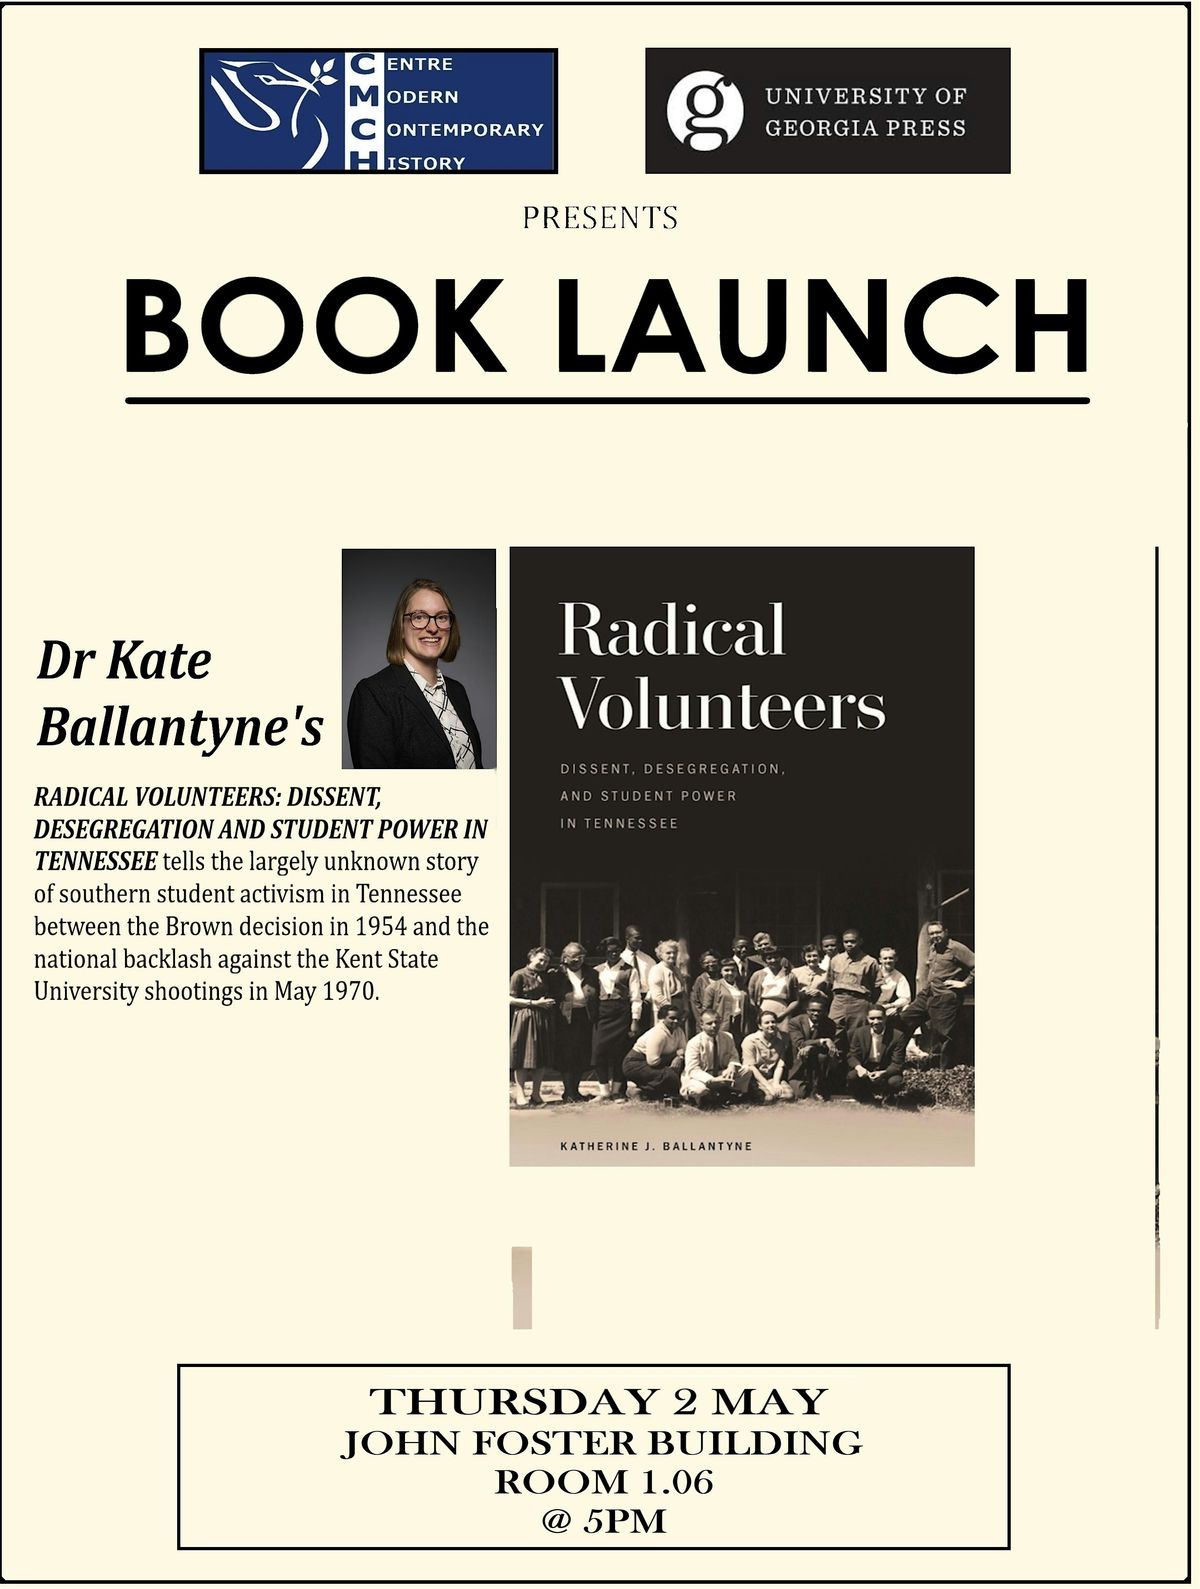 BOOK LAUNCH - Radical Volunteers: Dissent, Desegregation and Student Power